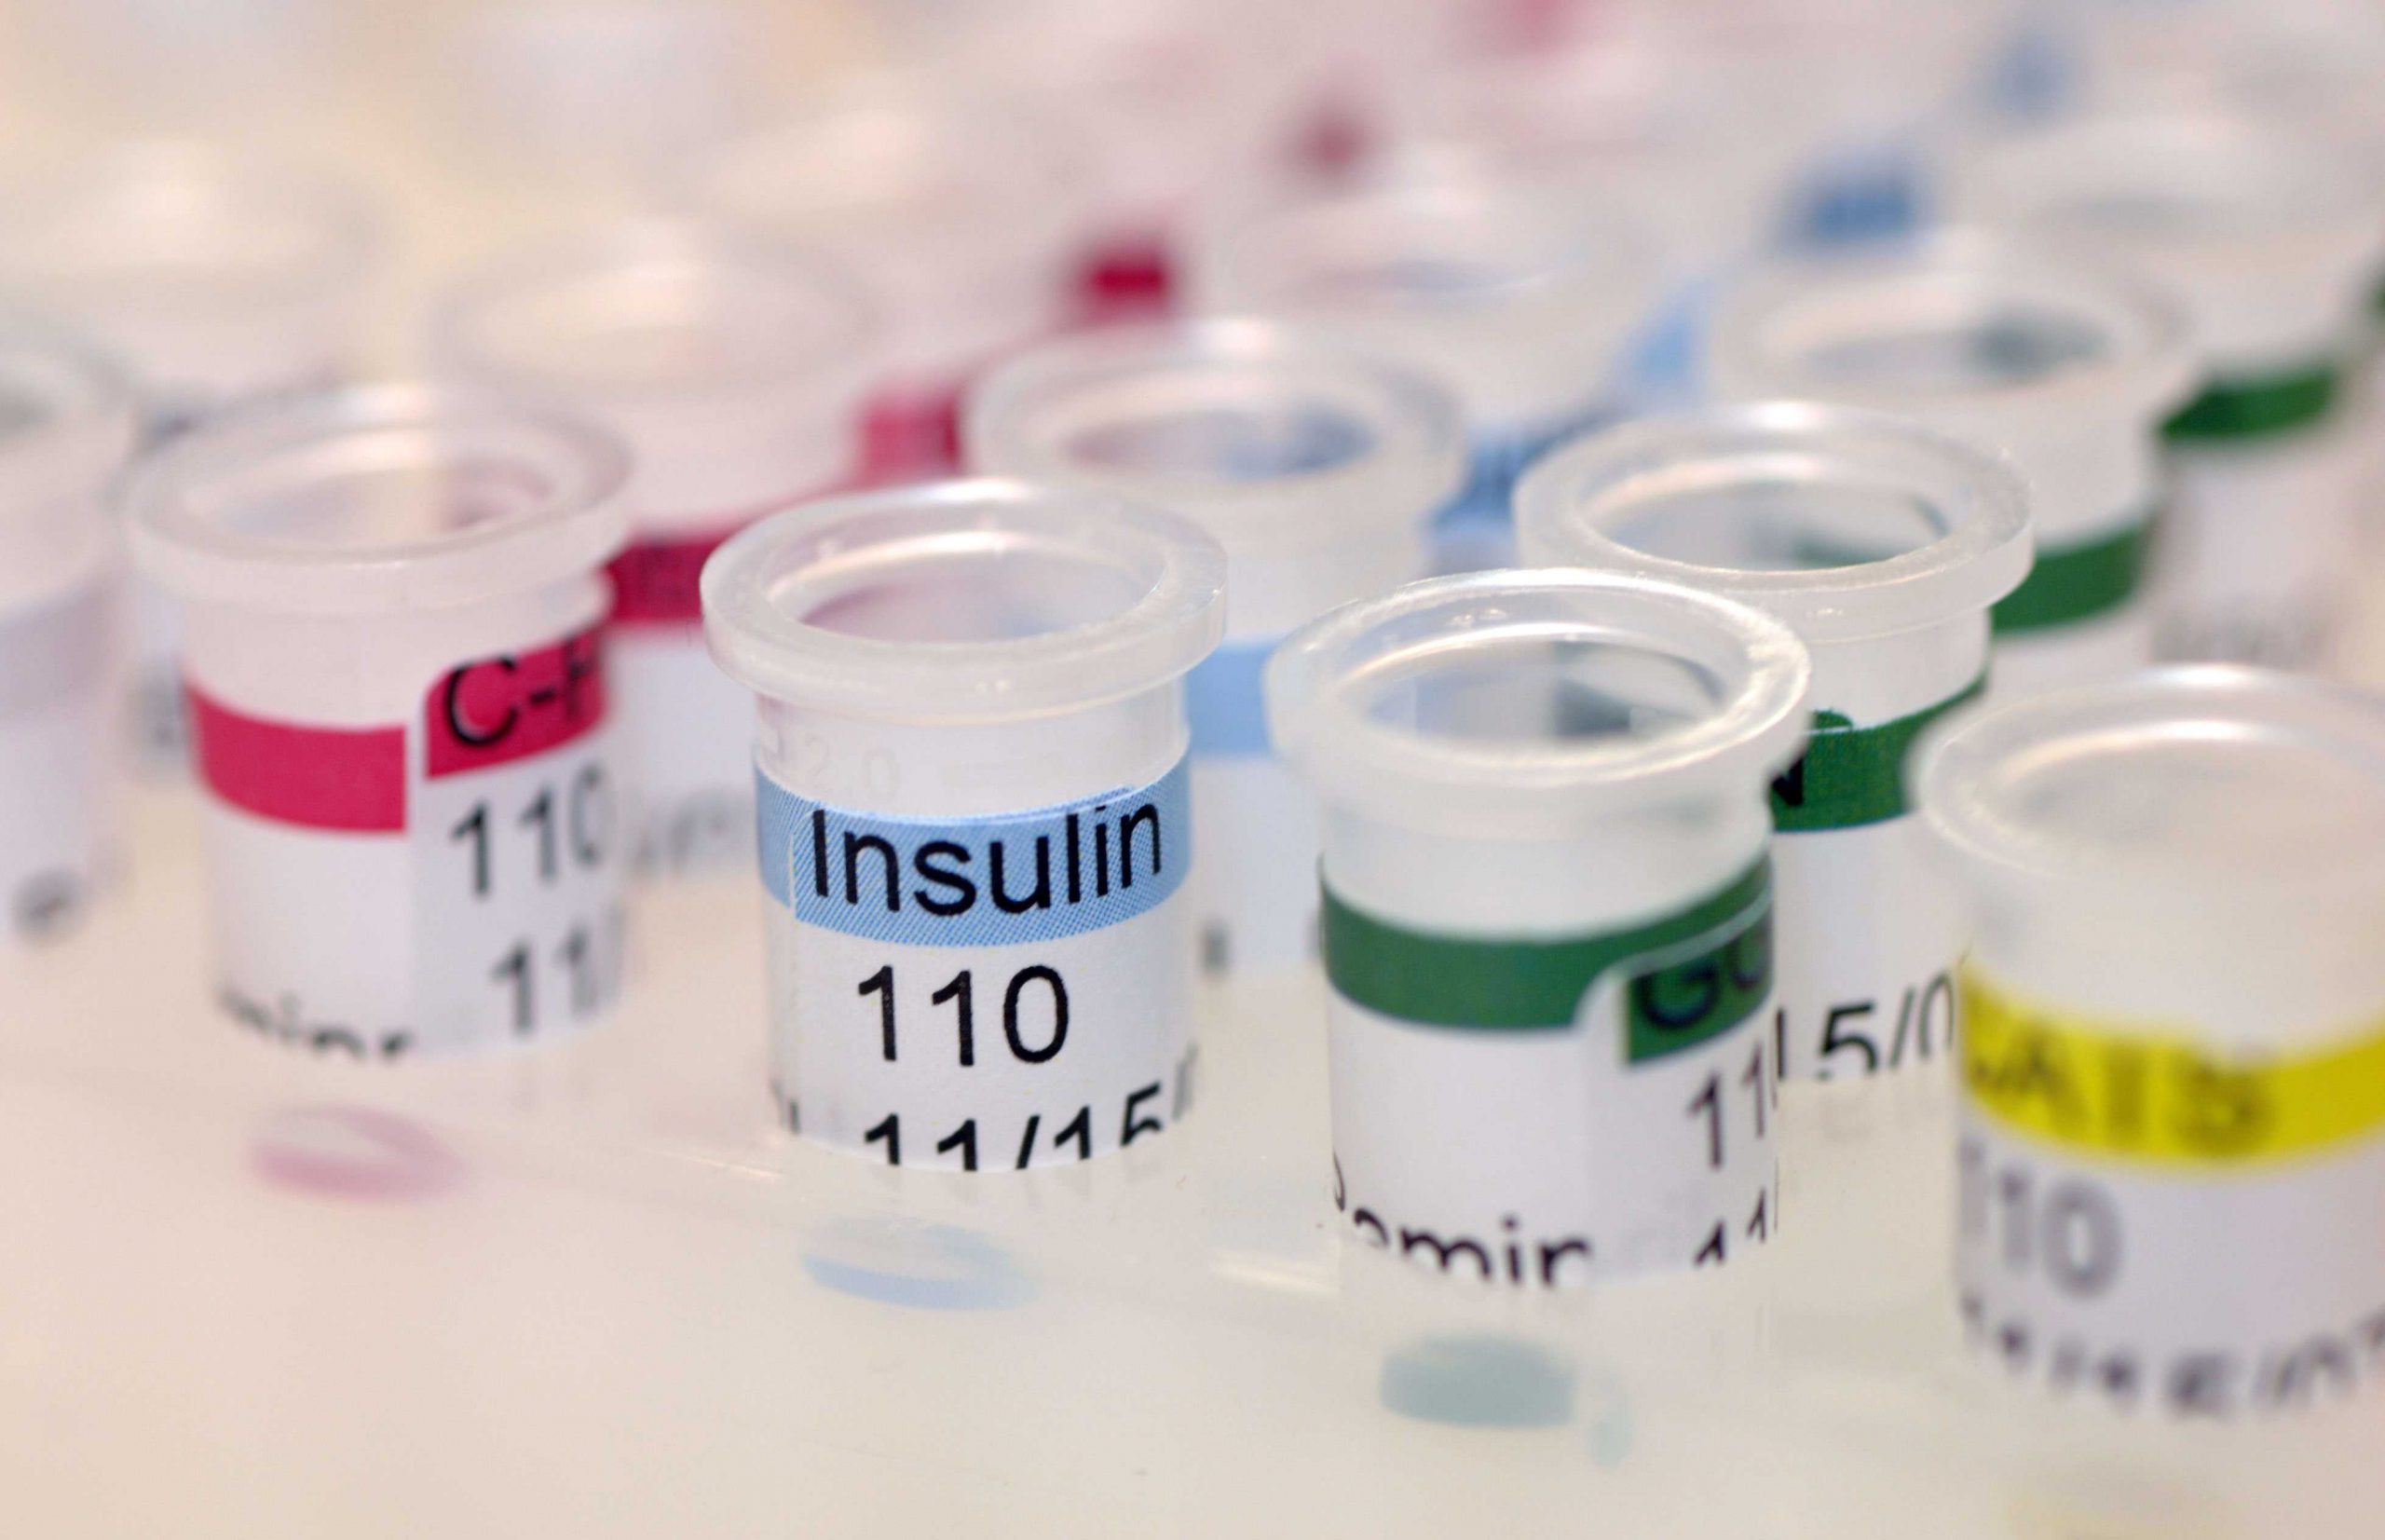 Which Type Of Diabetes Requires 4 Shots Of Insulin A Day?